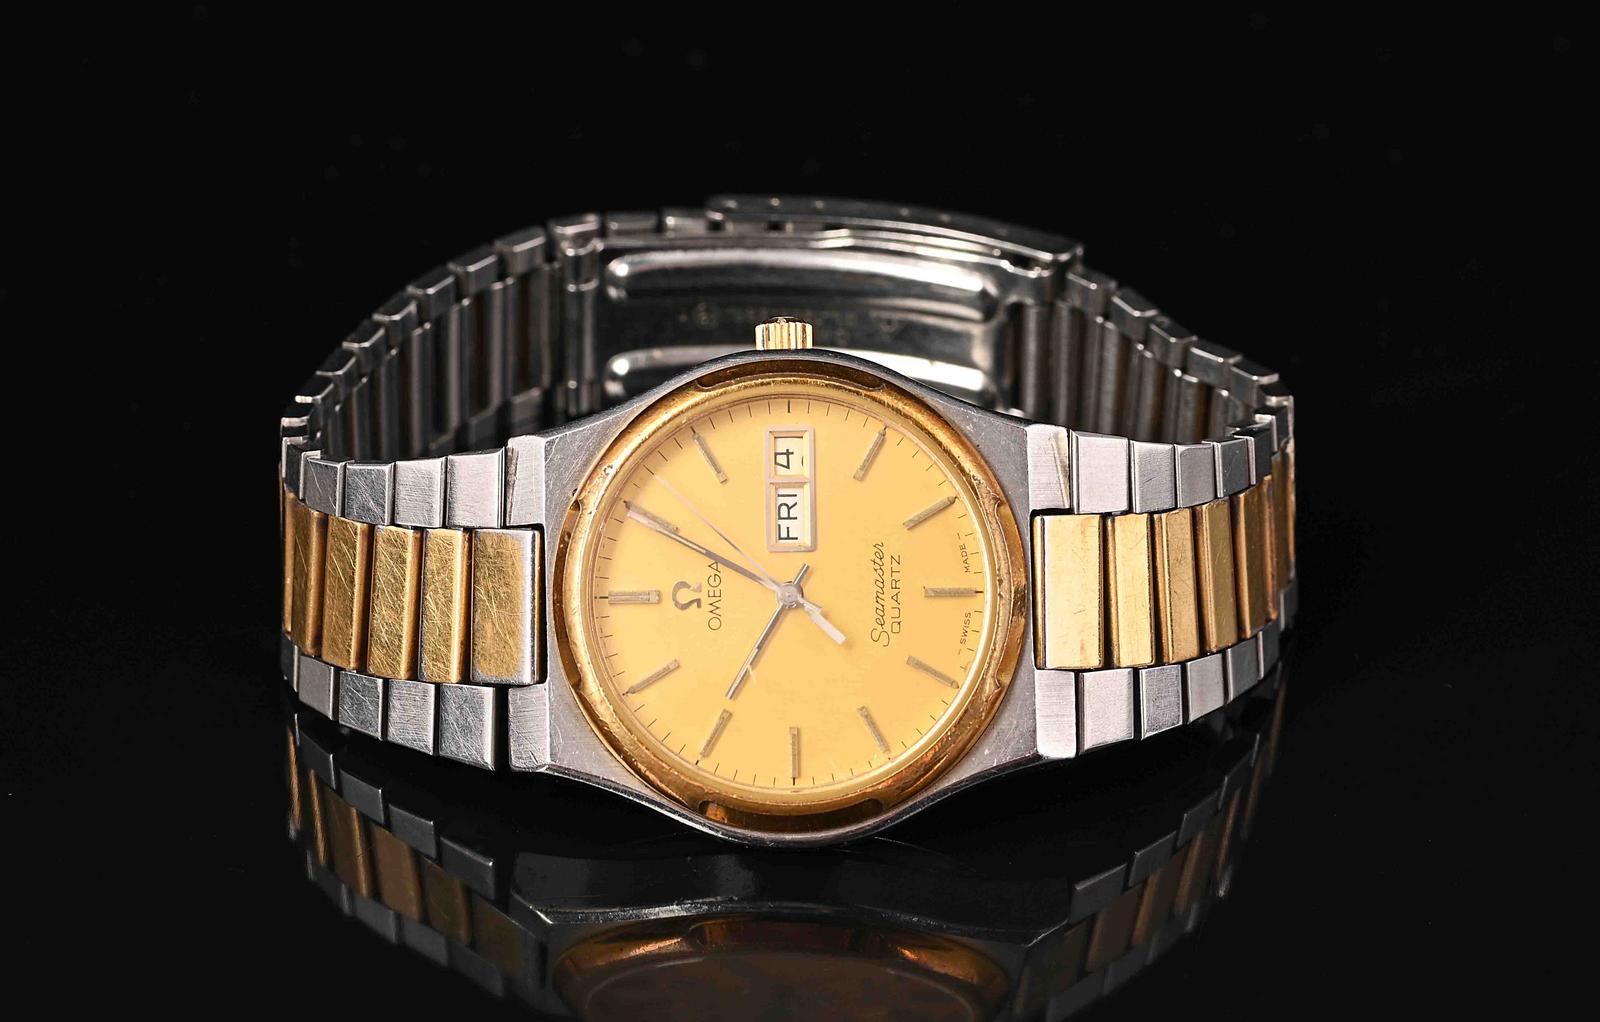 Gents Omega Seamaster quartz watch, gold colour dial, gold colour bezel,  Stainless steel and gold colour strap, 34mm | Russell Kaplan Auctioneers